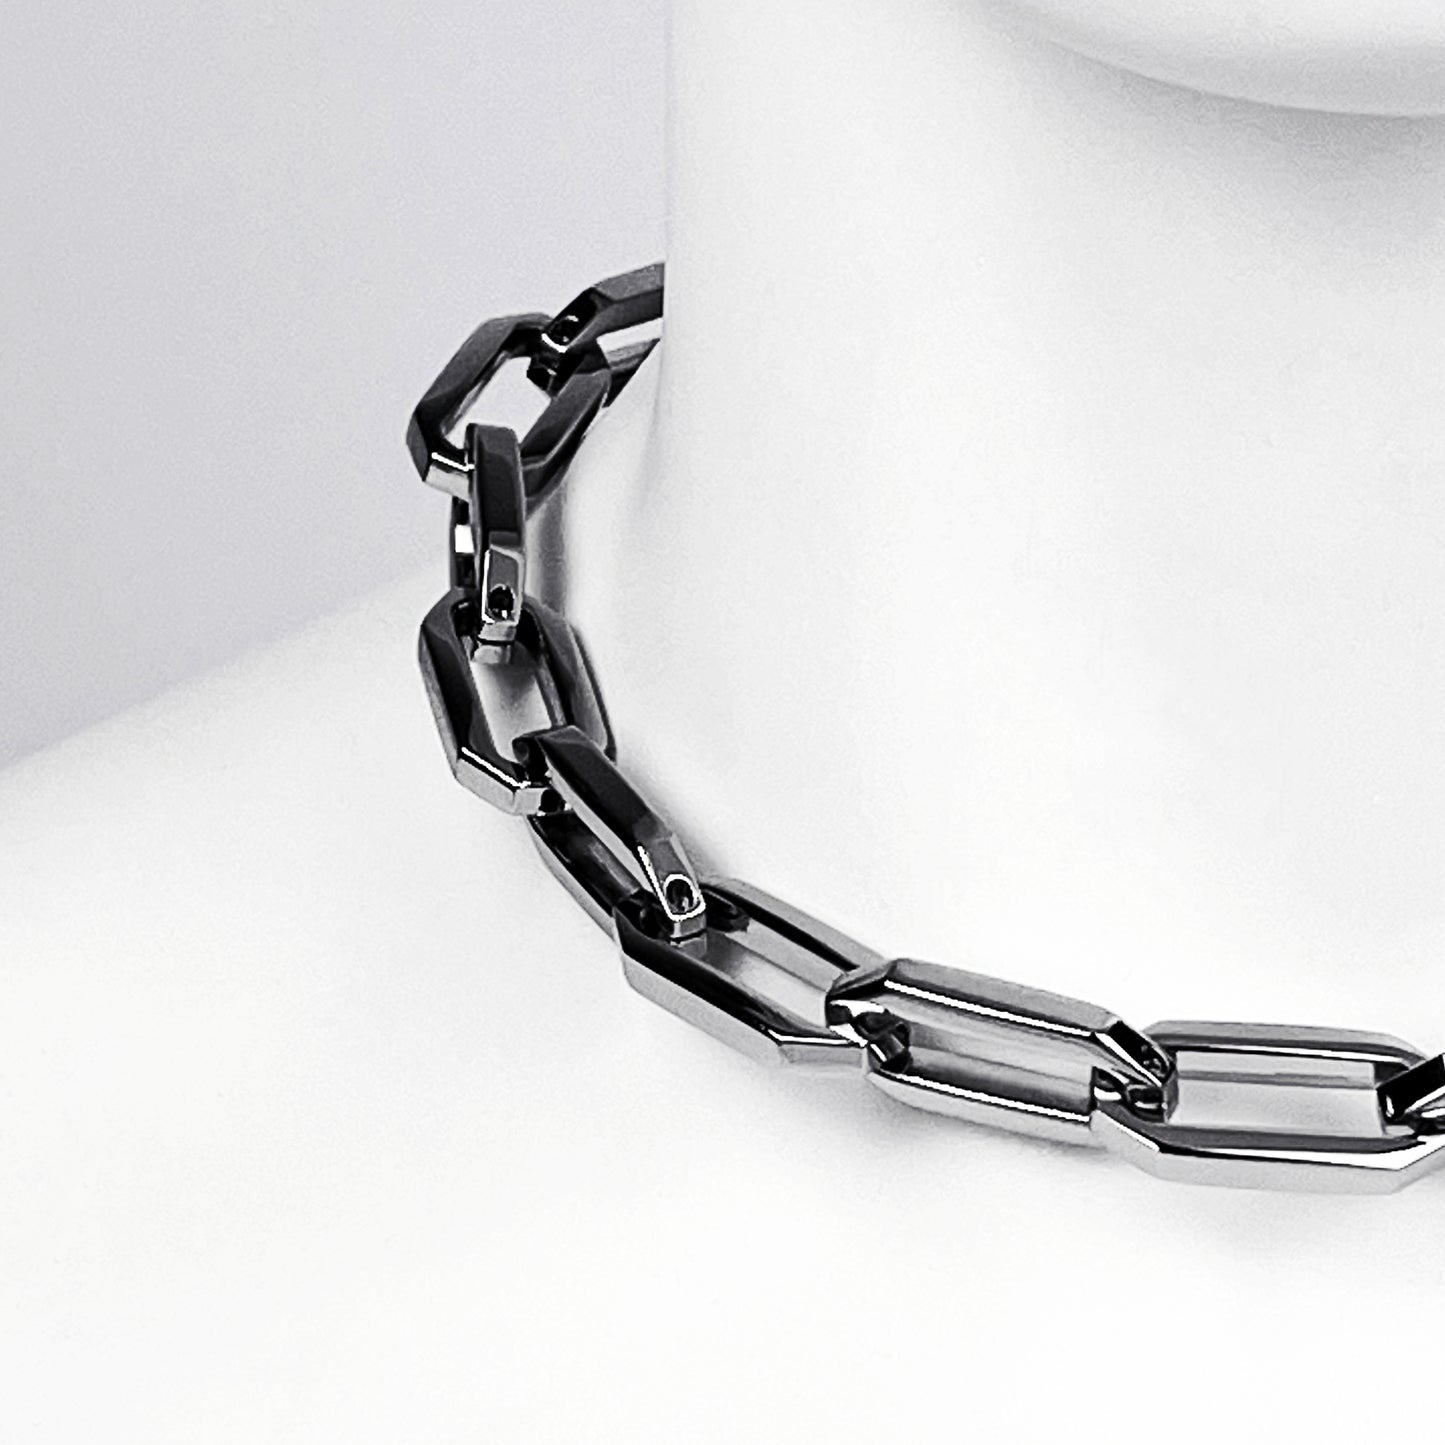 X31-01 chain necklace